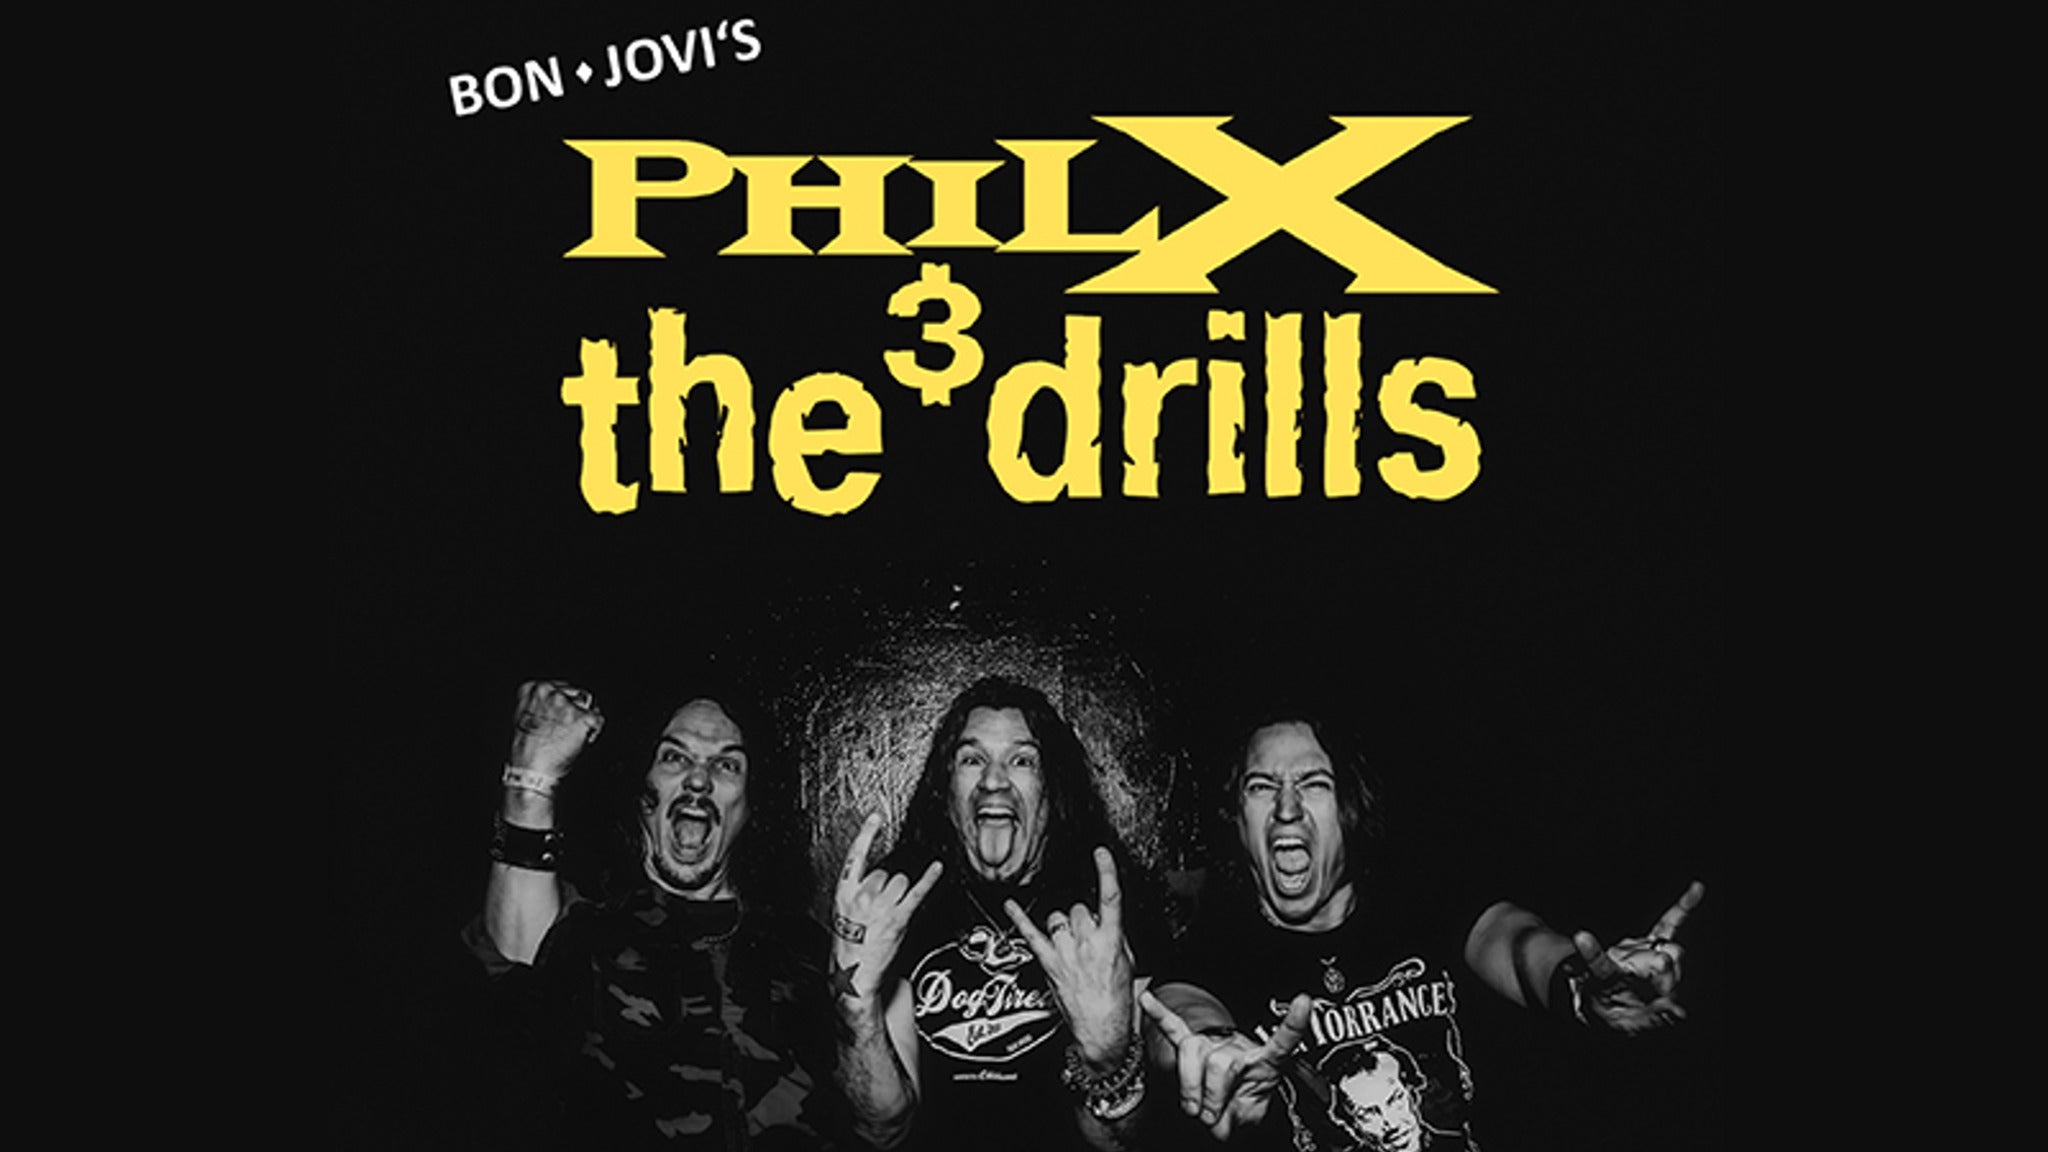 Phil X & The Drills Event Title Pic